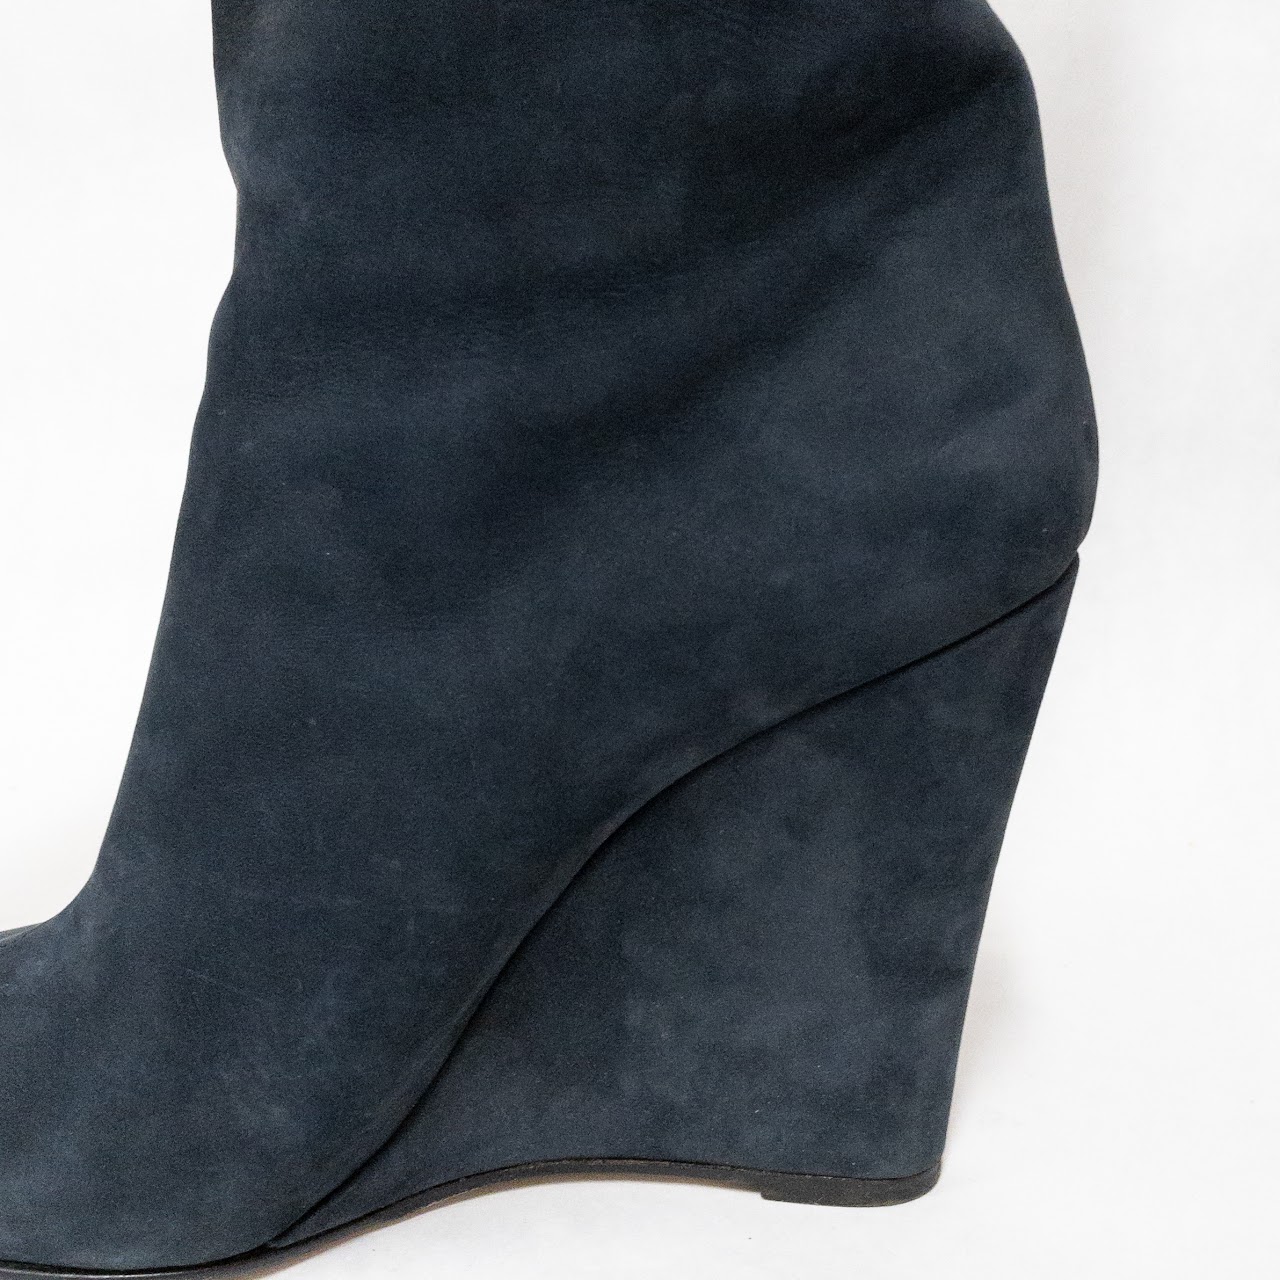 Valentino Over The Knee Suede Wedge Boots